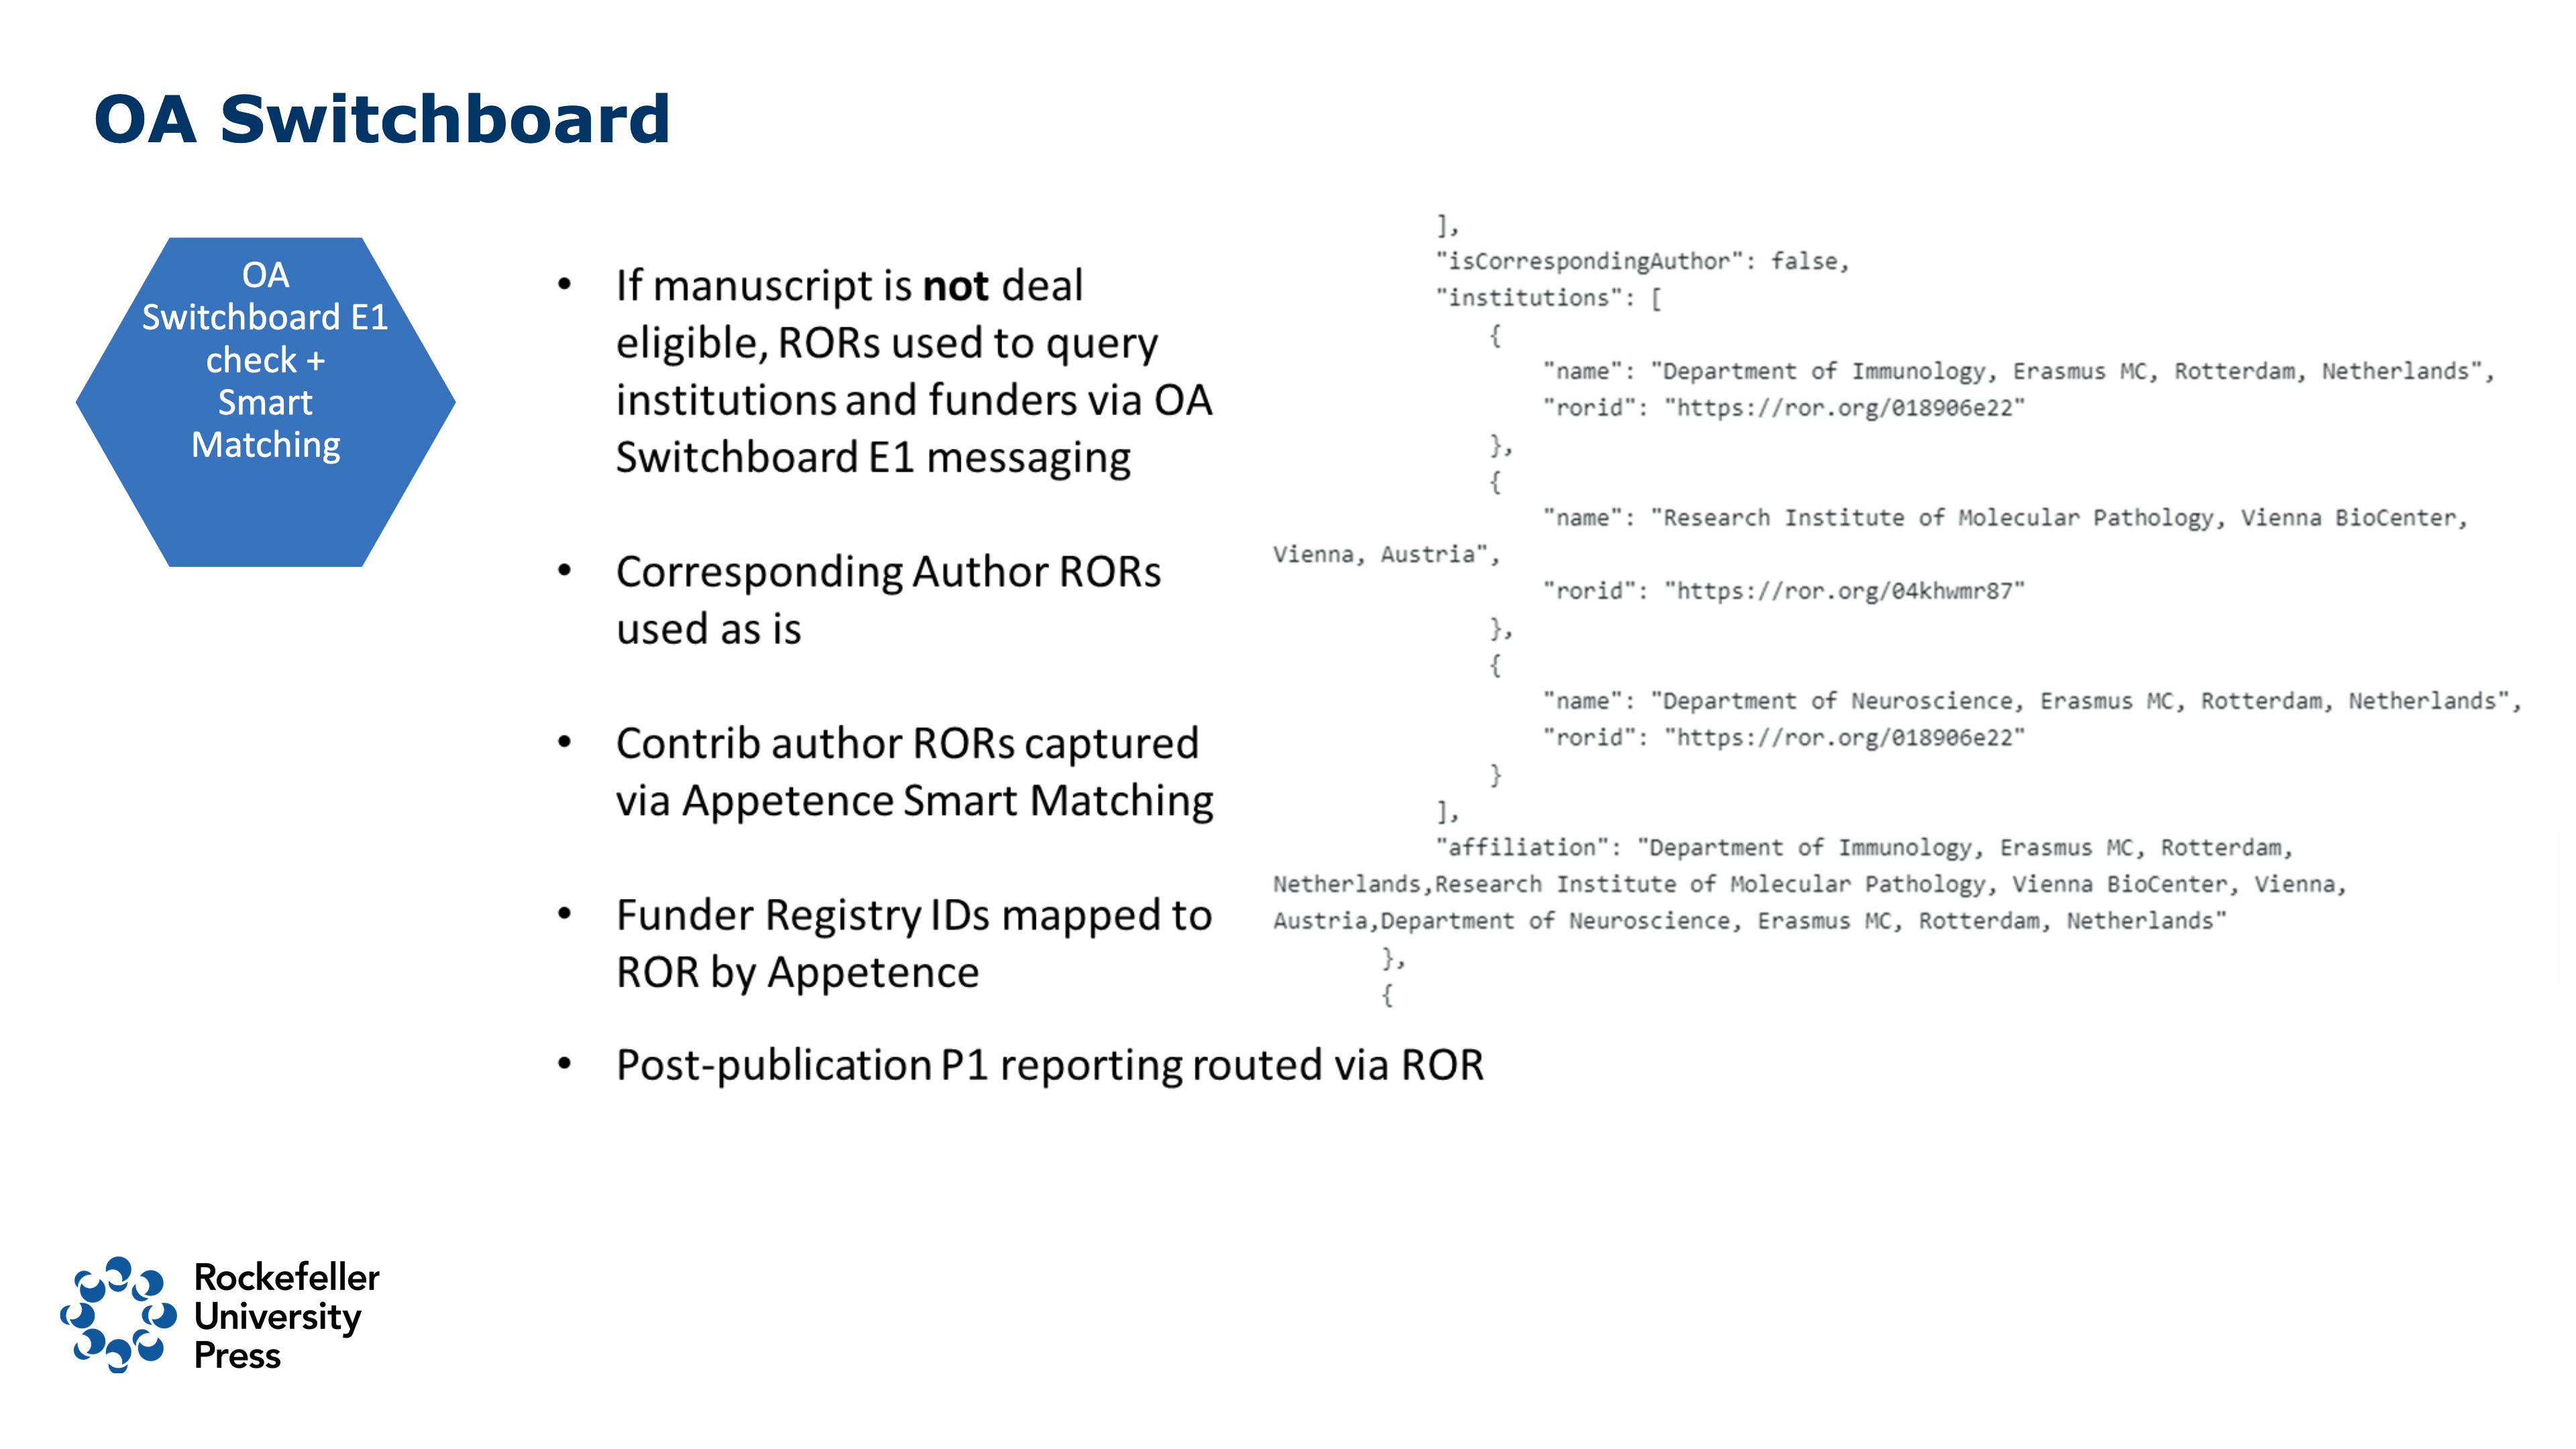 OA Switchboard: Eligibility E1 check, smart matching, corresponding author ROR IDs used as is, contributing author ROR IDs captured via Appetence smart matching, Funder IDs mapped to ROR by Appetence, post-publication P1 reporting routed via ROR